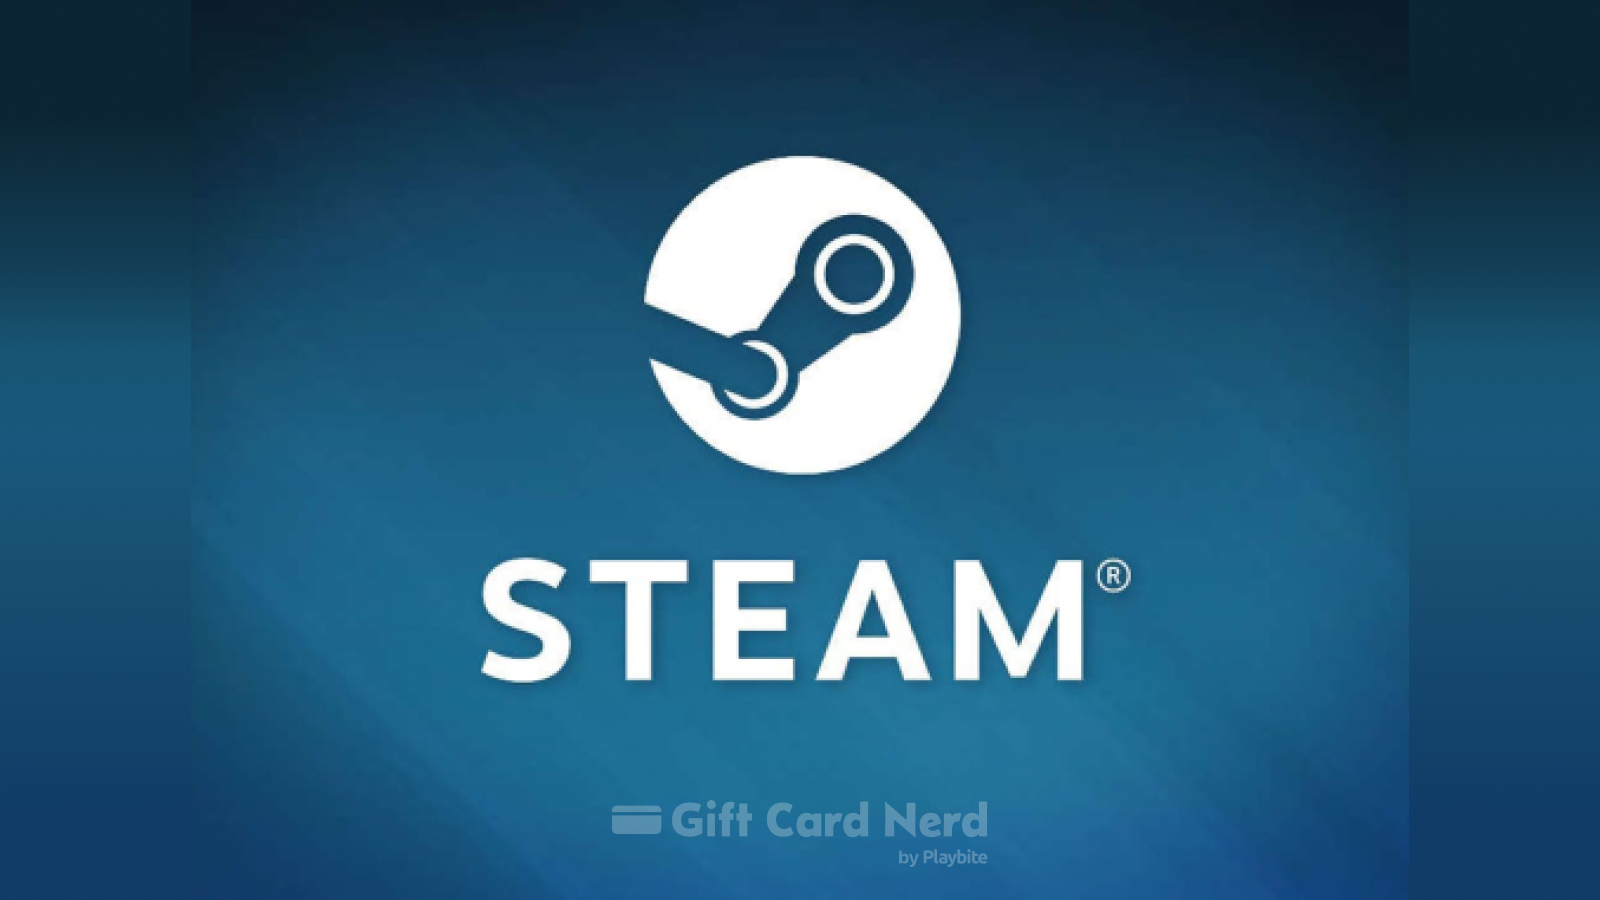 Can I Use a Steam Gift Card on Uber Eats?